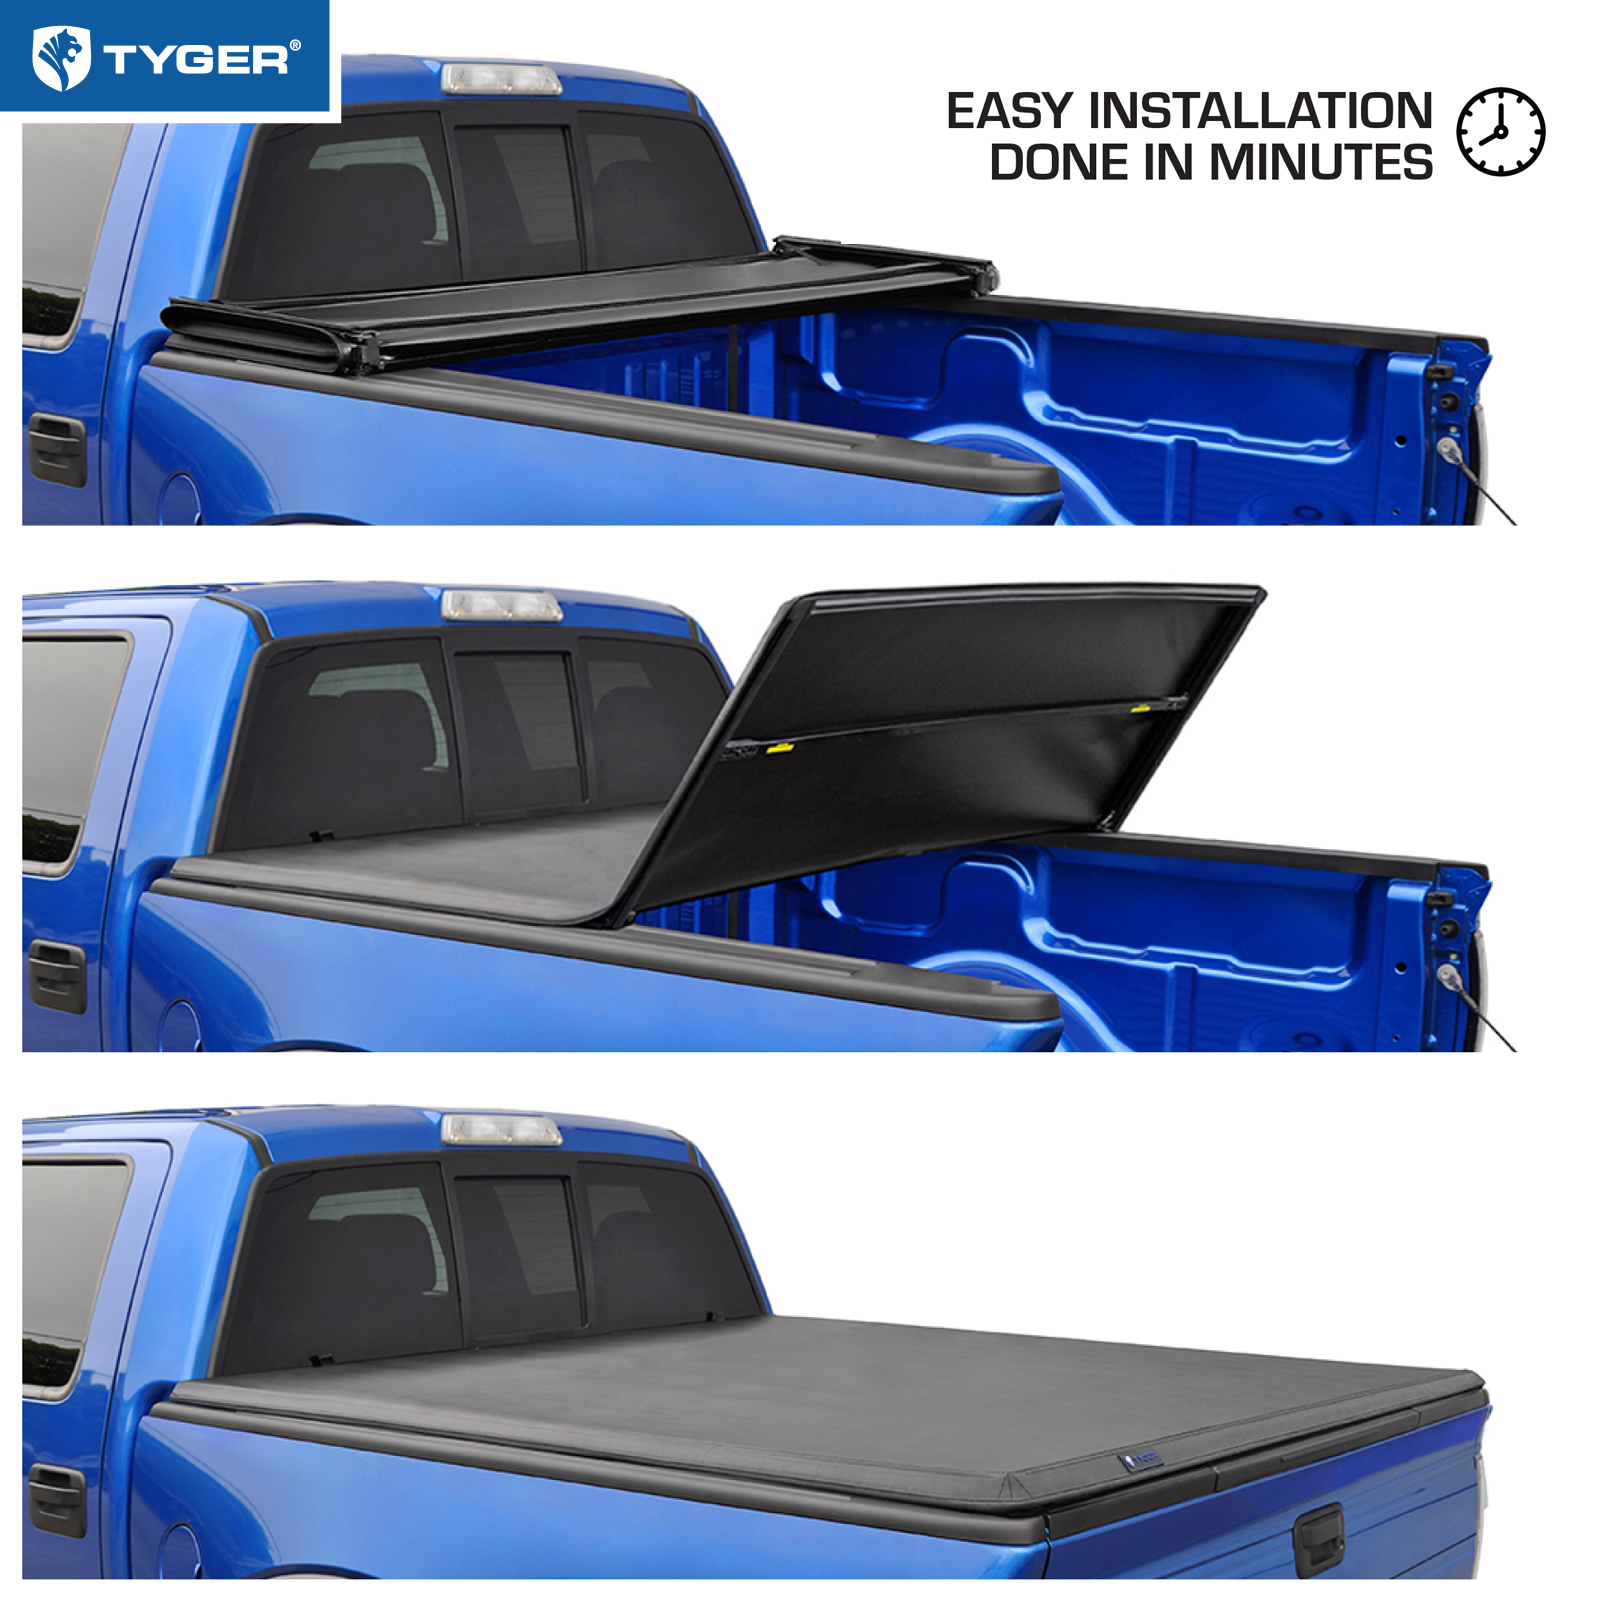 Tyger Auto T3 Soft Tri-fold Truck Bed Tonneau Cover Compatible with 2009-2014 Ford F-150 | Fleetside 6.5' Bed | TG-BC3F1020 | Vinyl - image 5 of 9